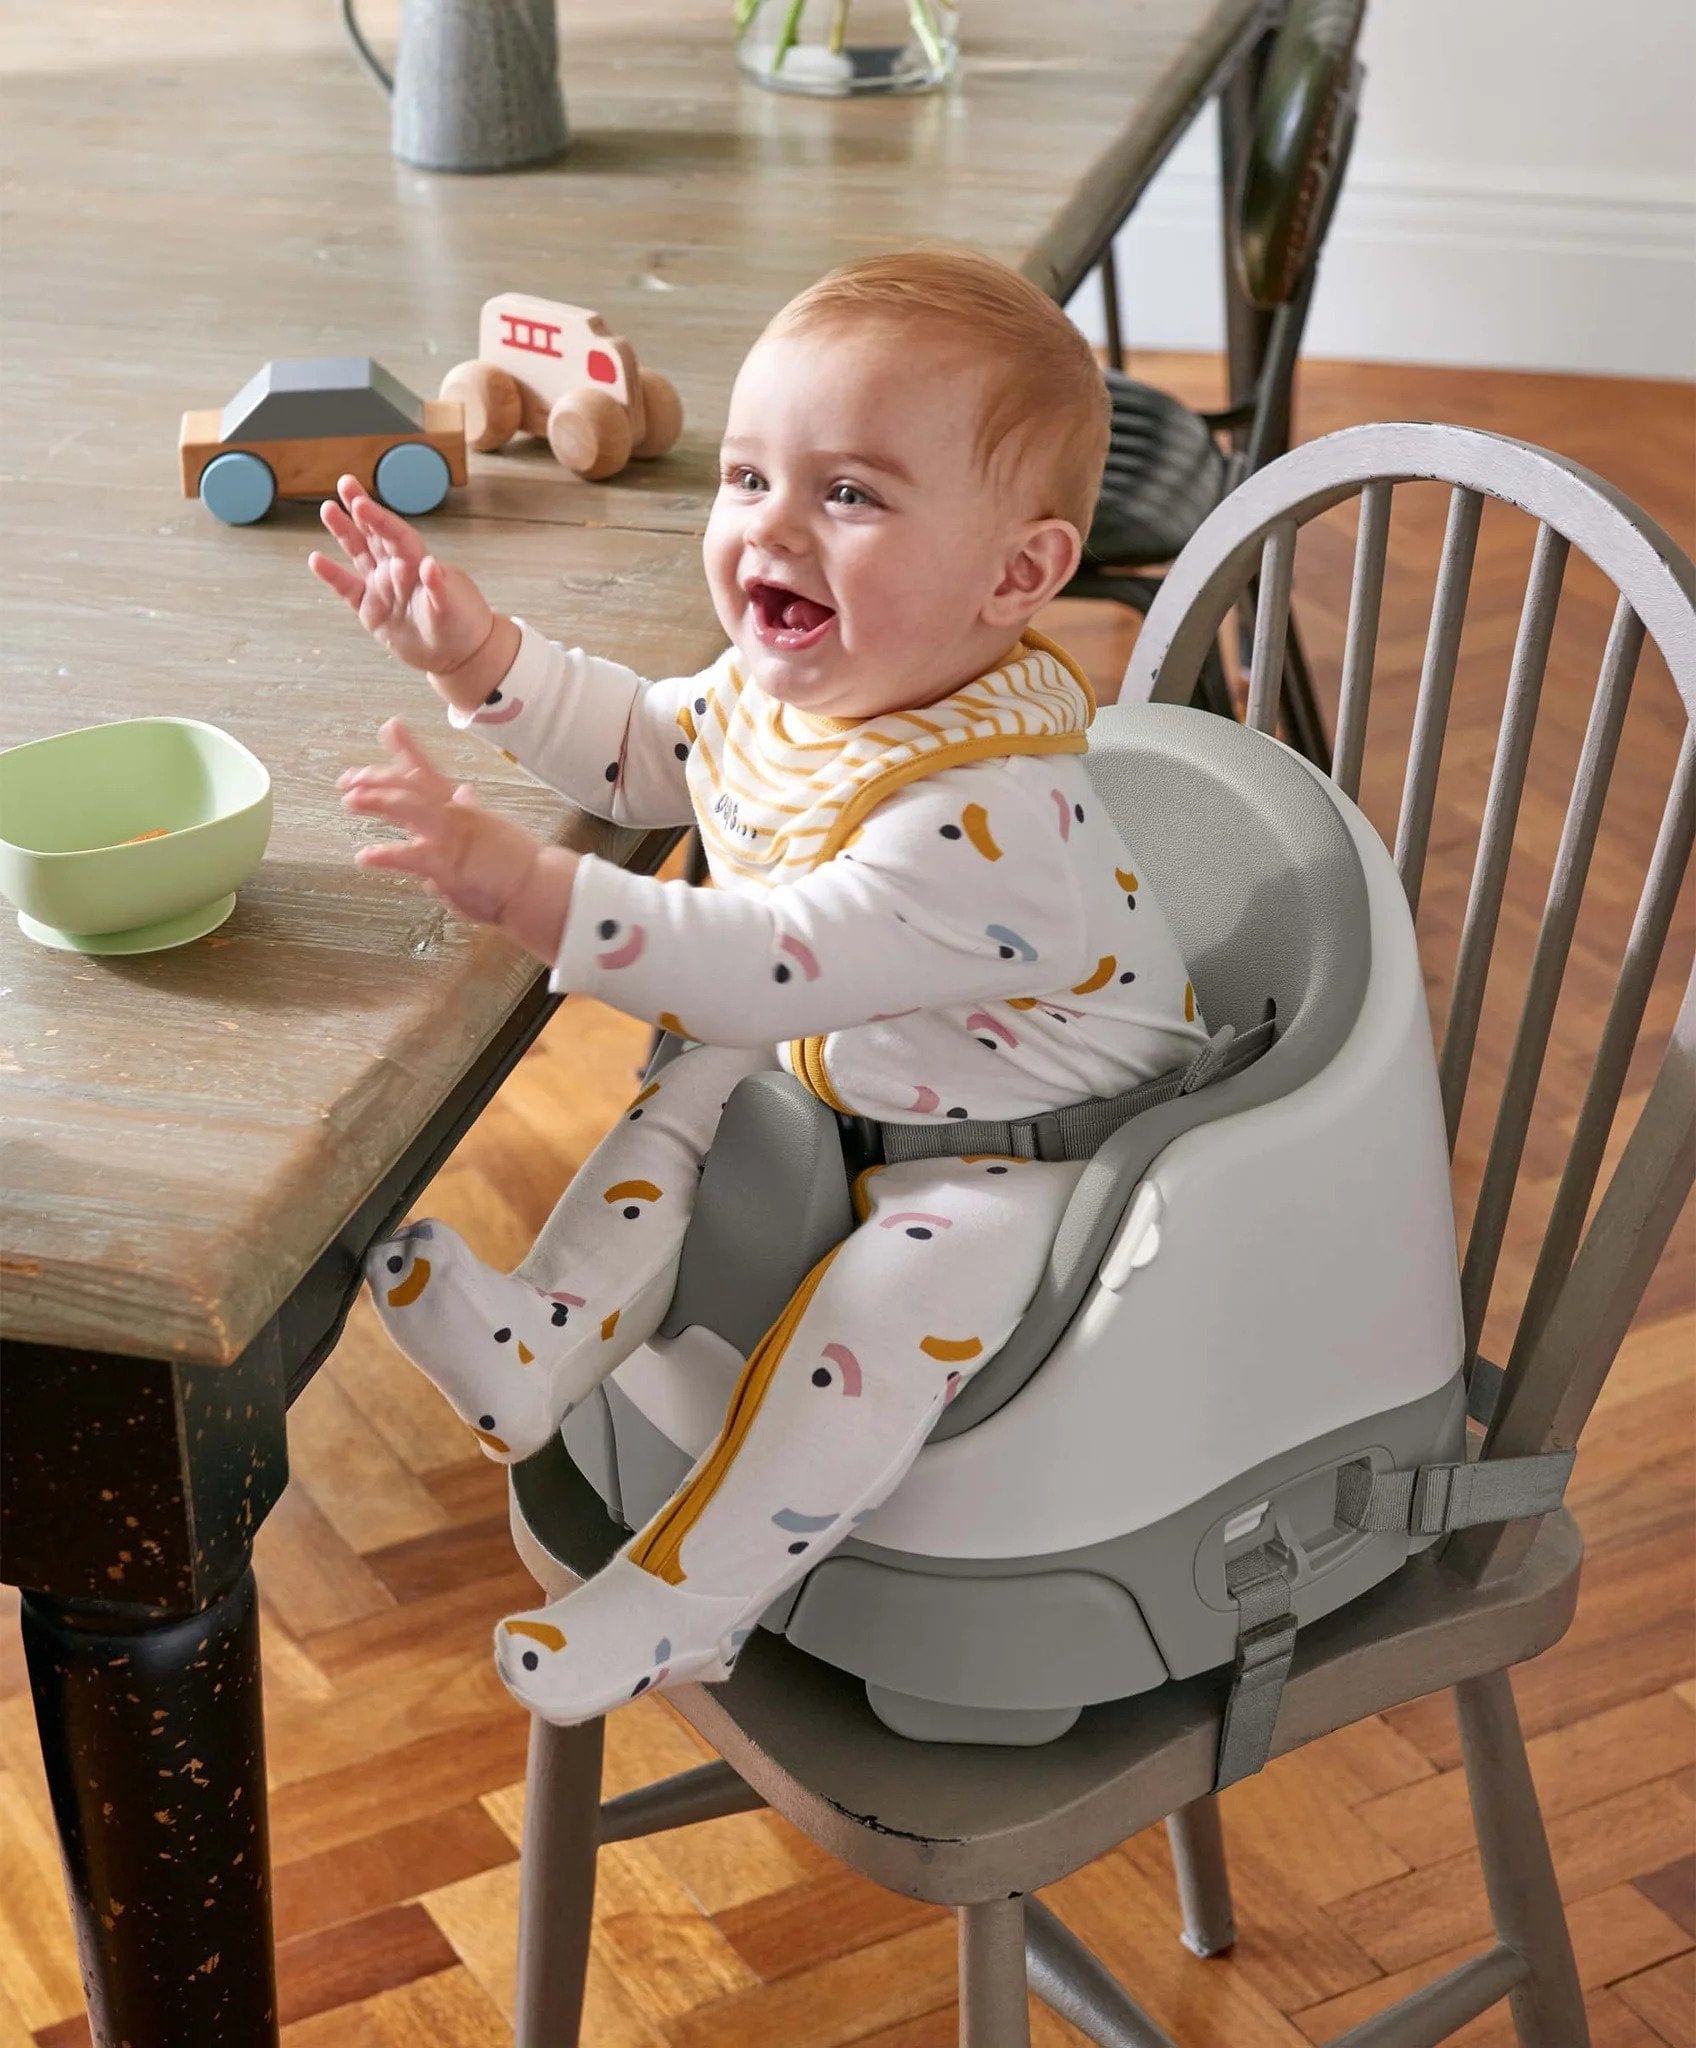 Mamas & Papas Bug 3-in-1 Floor & Booster Seat with Activity Tray in Pebble Grey Activity Toys